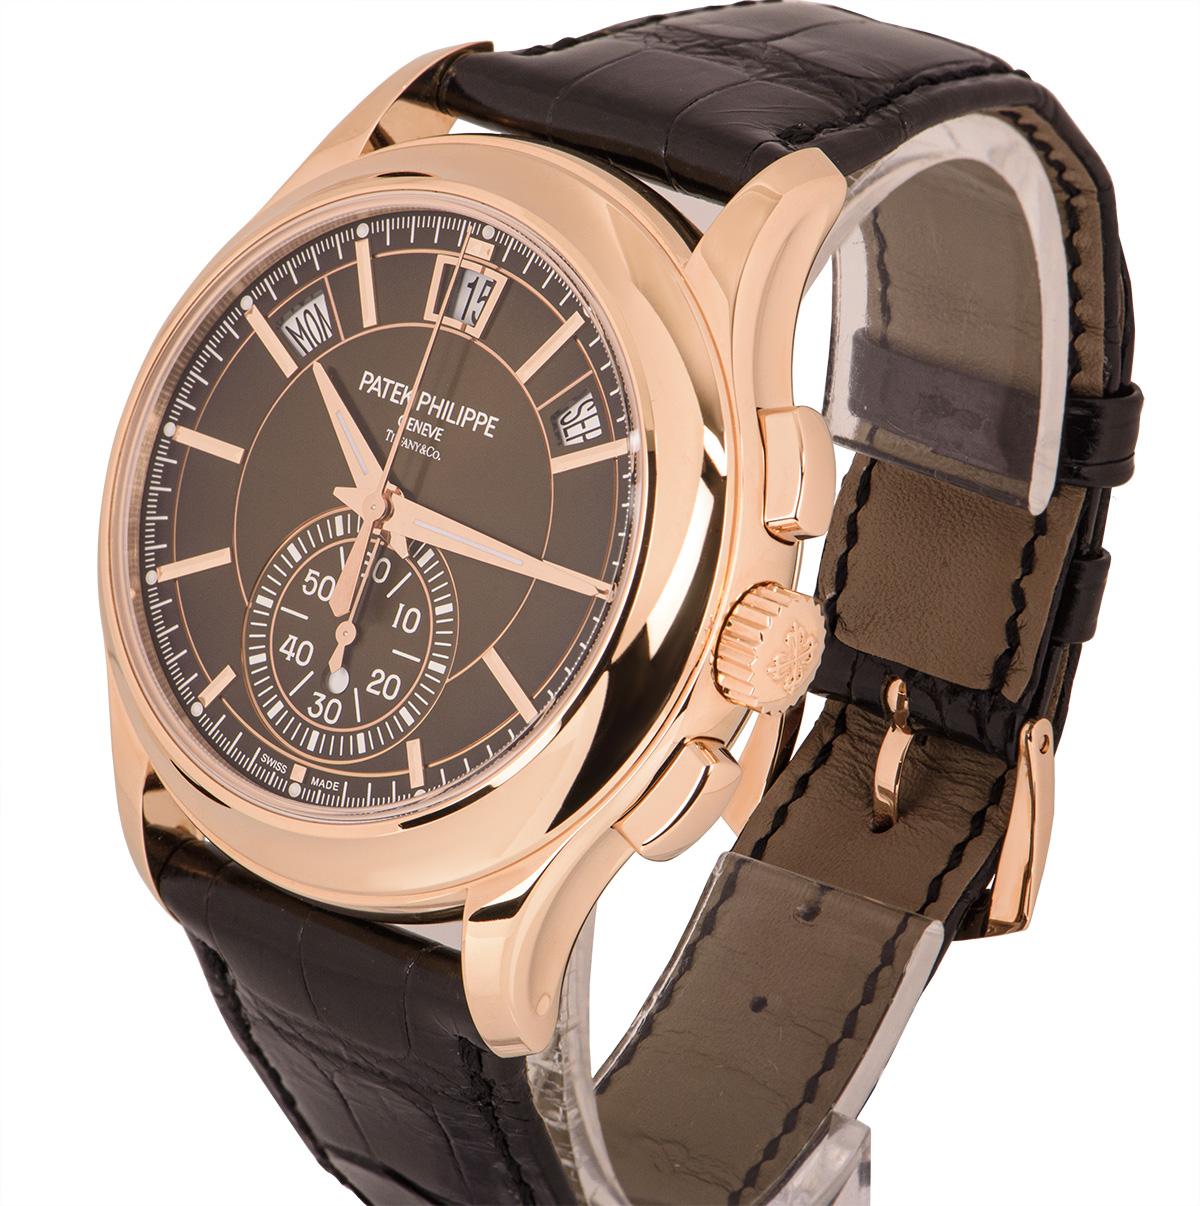 A 42 mm Unworn 18k Rose Gold Complications Annual Calendar Gents Wristwatch, double name Tiffany & Co. brown sunburst dial gradually grading to black, applied hour markers, month between 1 and 2 0'clock, small seconds with day/night indication at 6